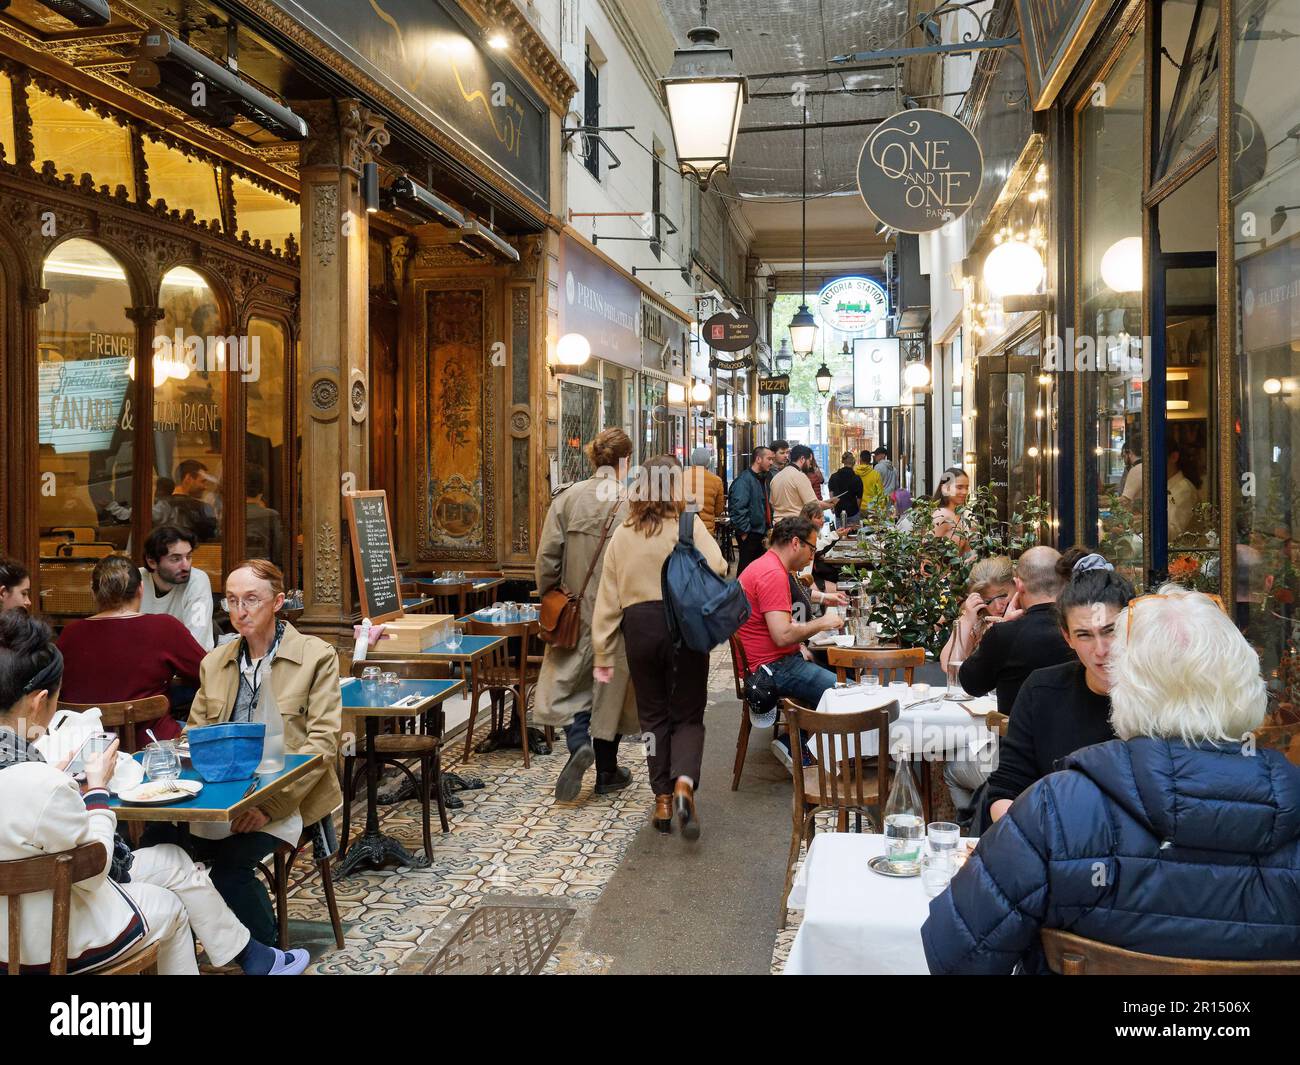 View looking along the bars and restaurants of the covered Passage des Panoramas passageway in Paris France Stock Photo